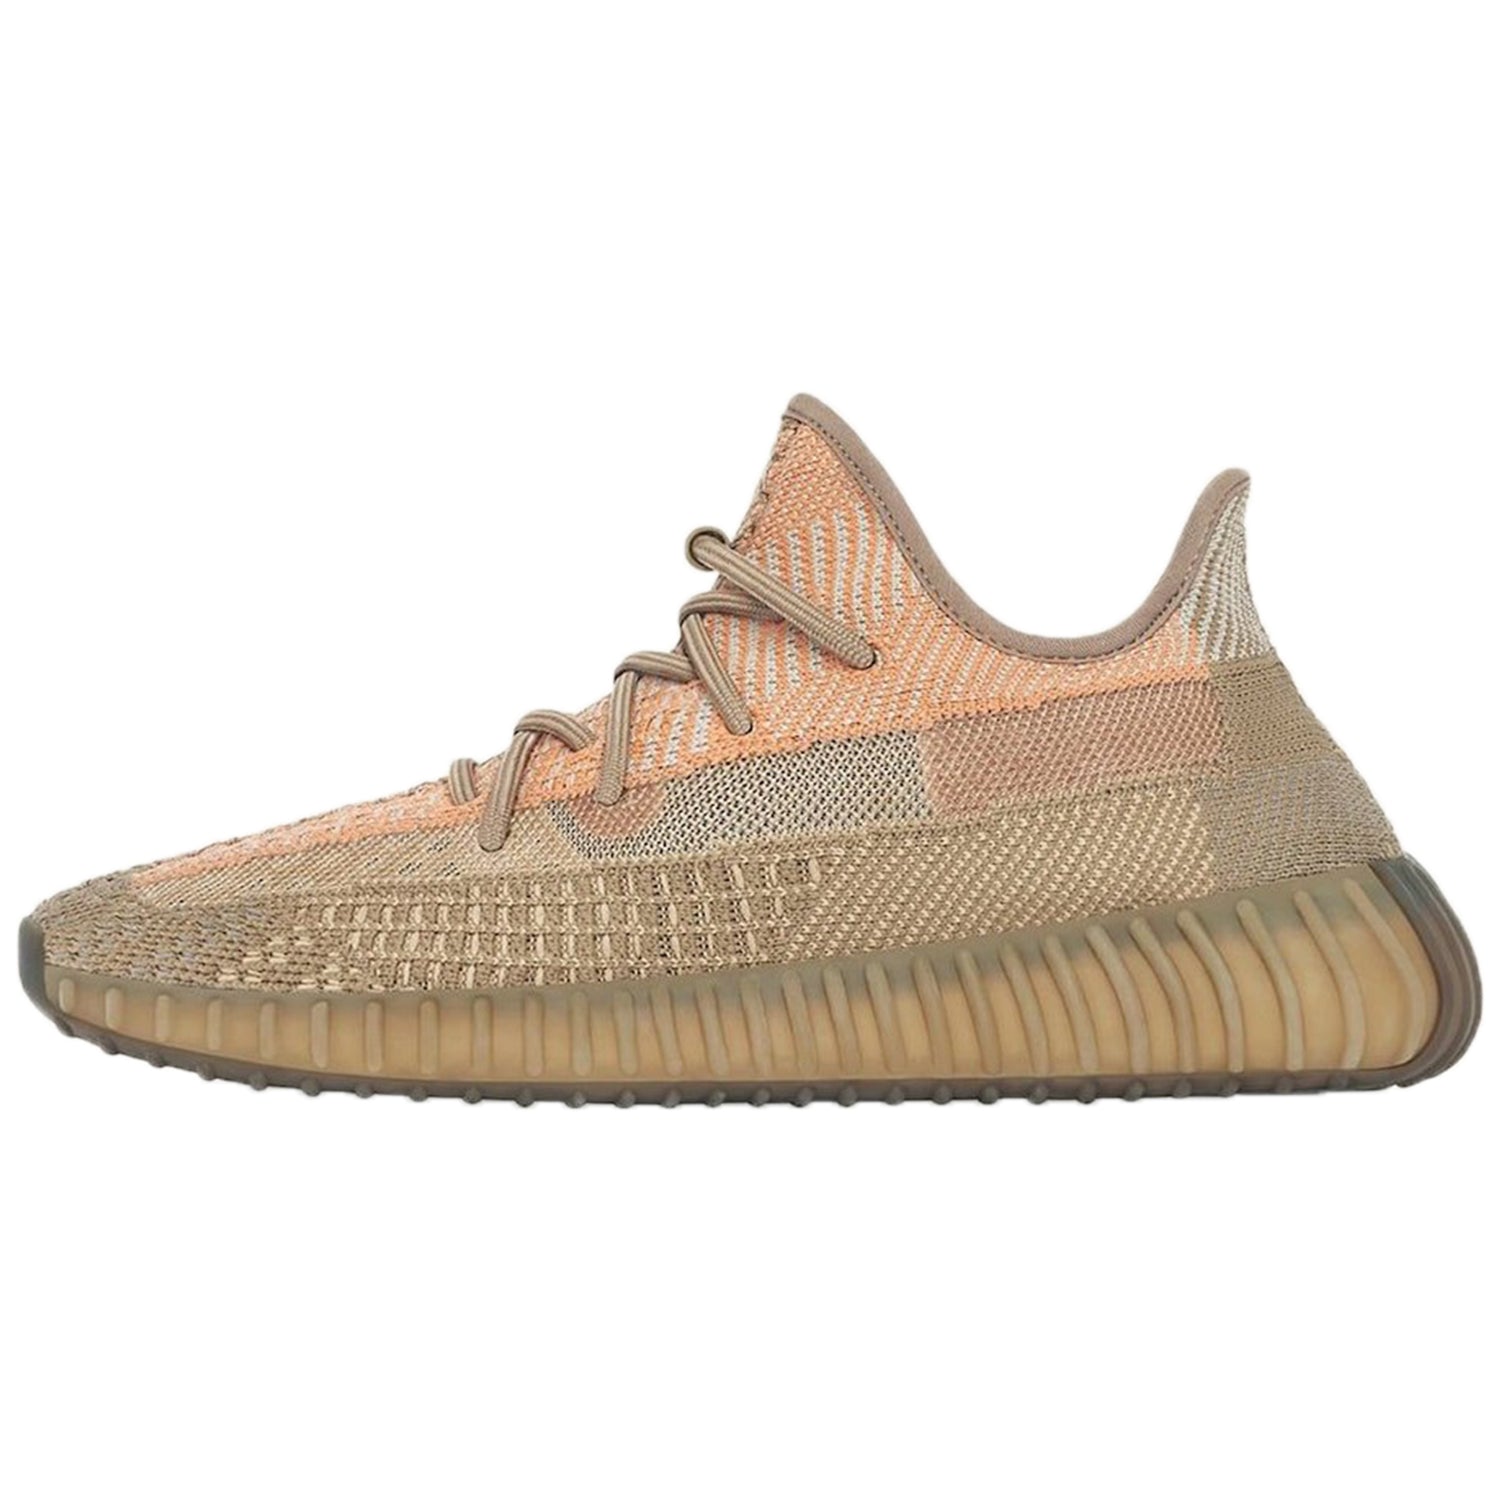 Adidas Yeezy Boost 350 V2 Sneaker Style FZ5240 Sand Taupe